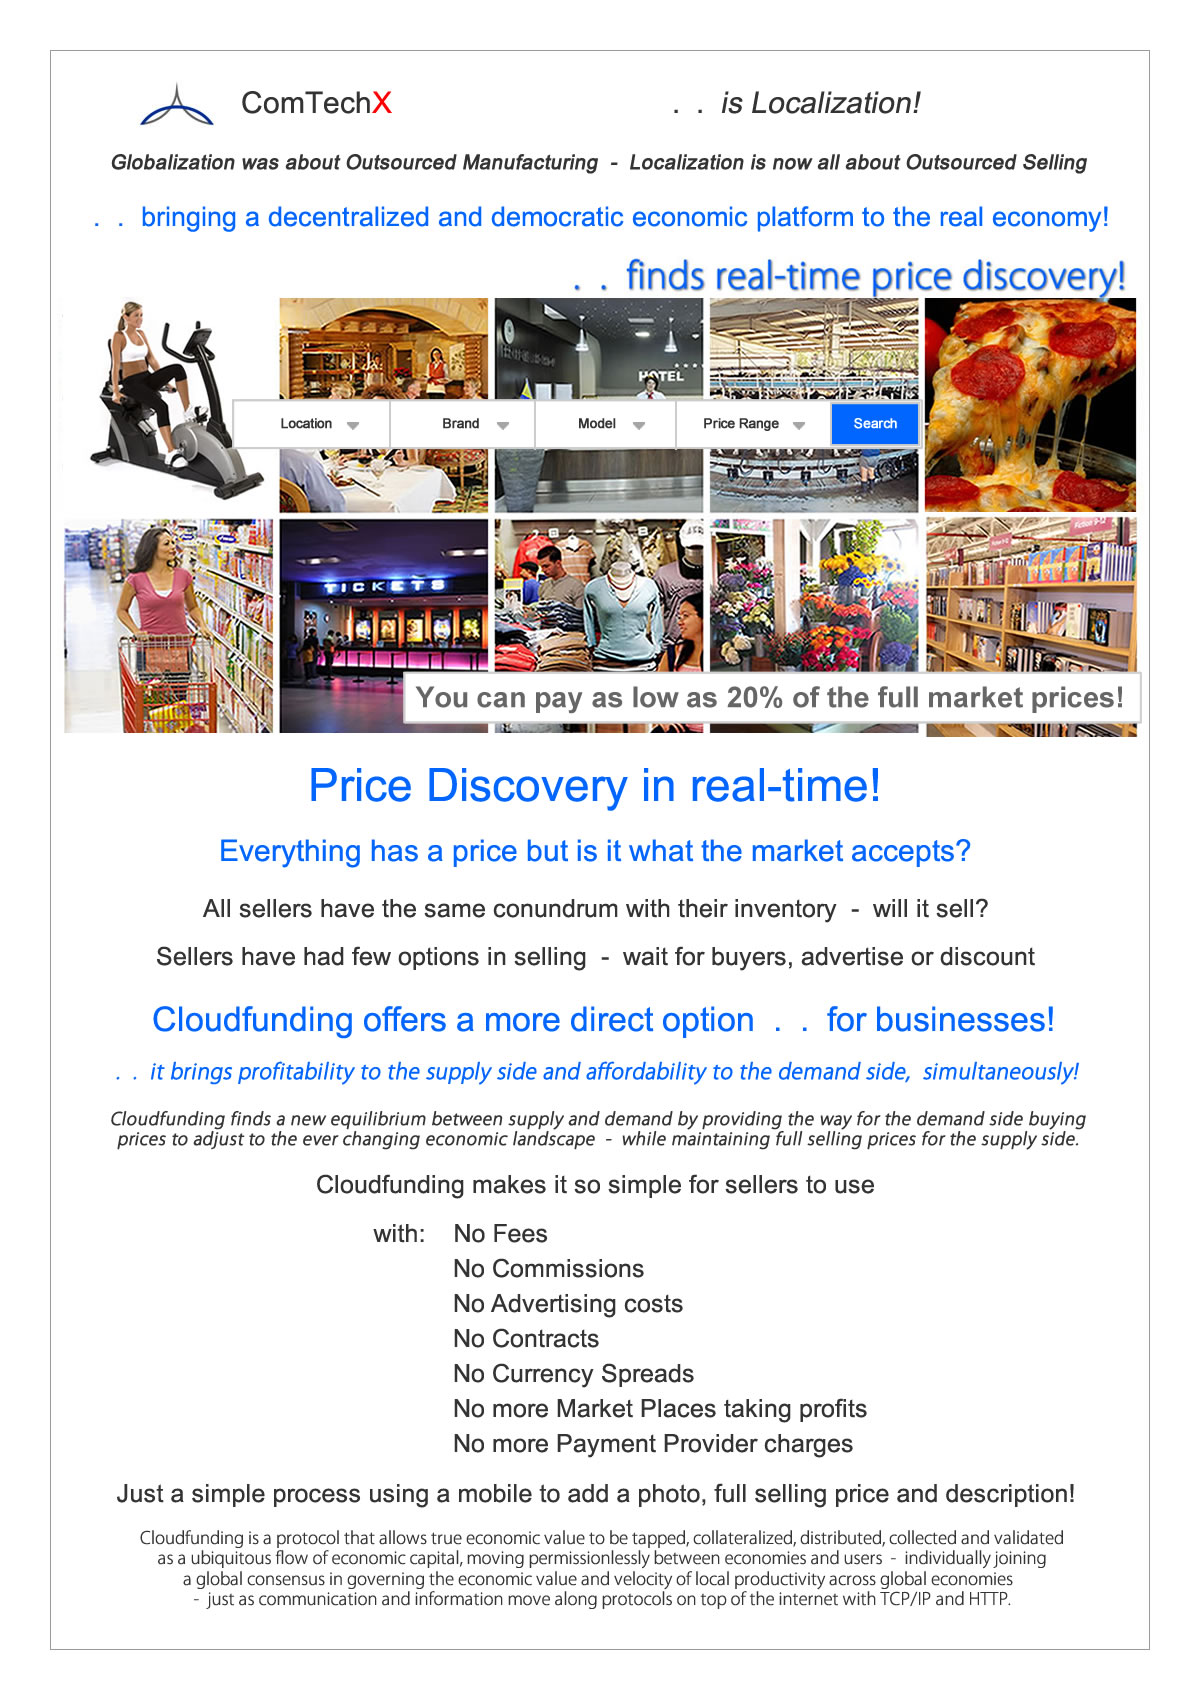 Price Discovery